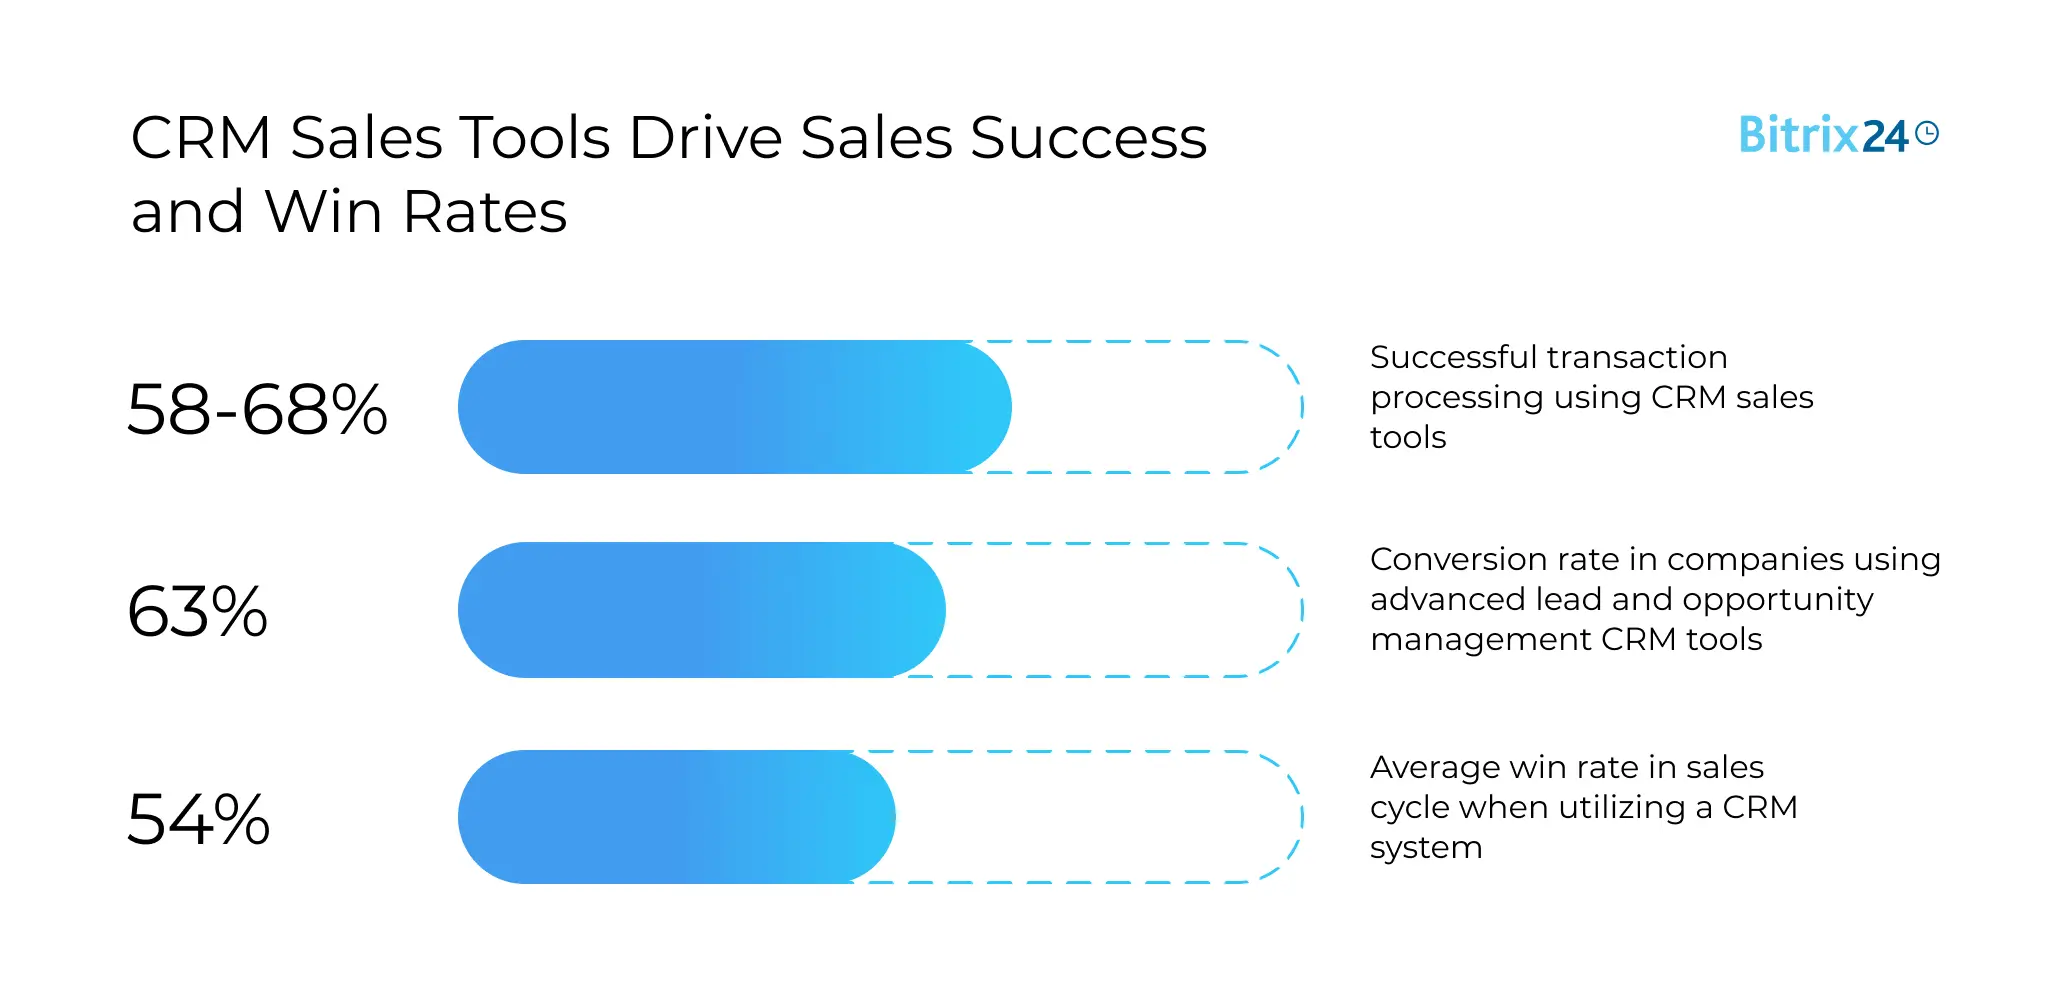 Growth Sales Tools Drive Sales Success and Win Rates